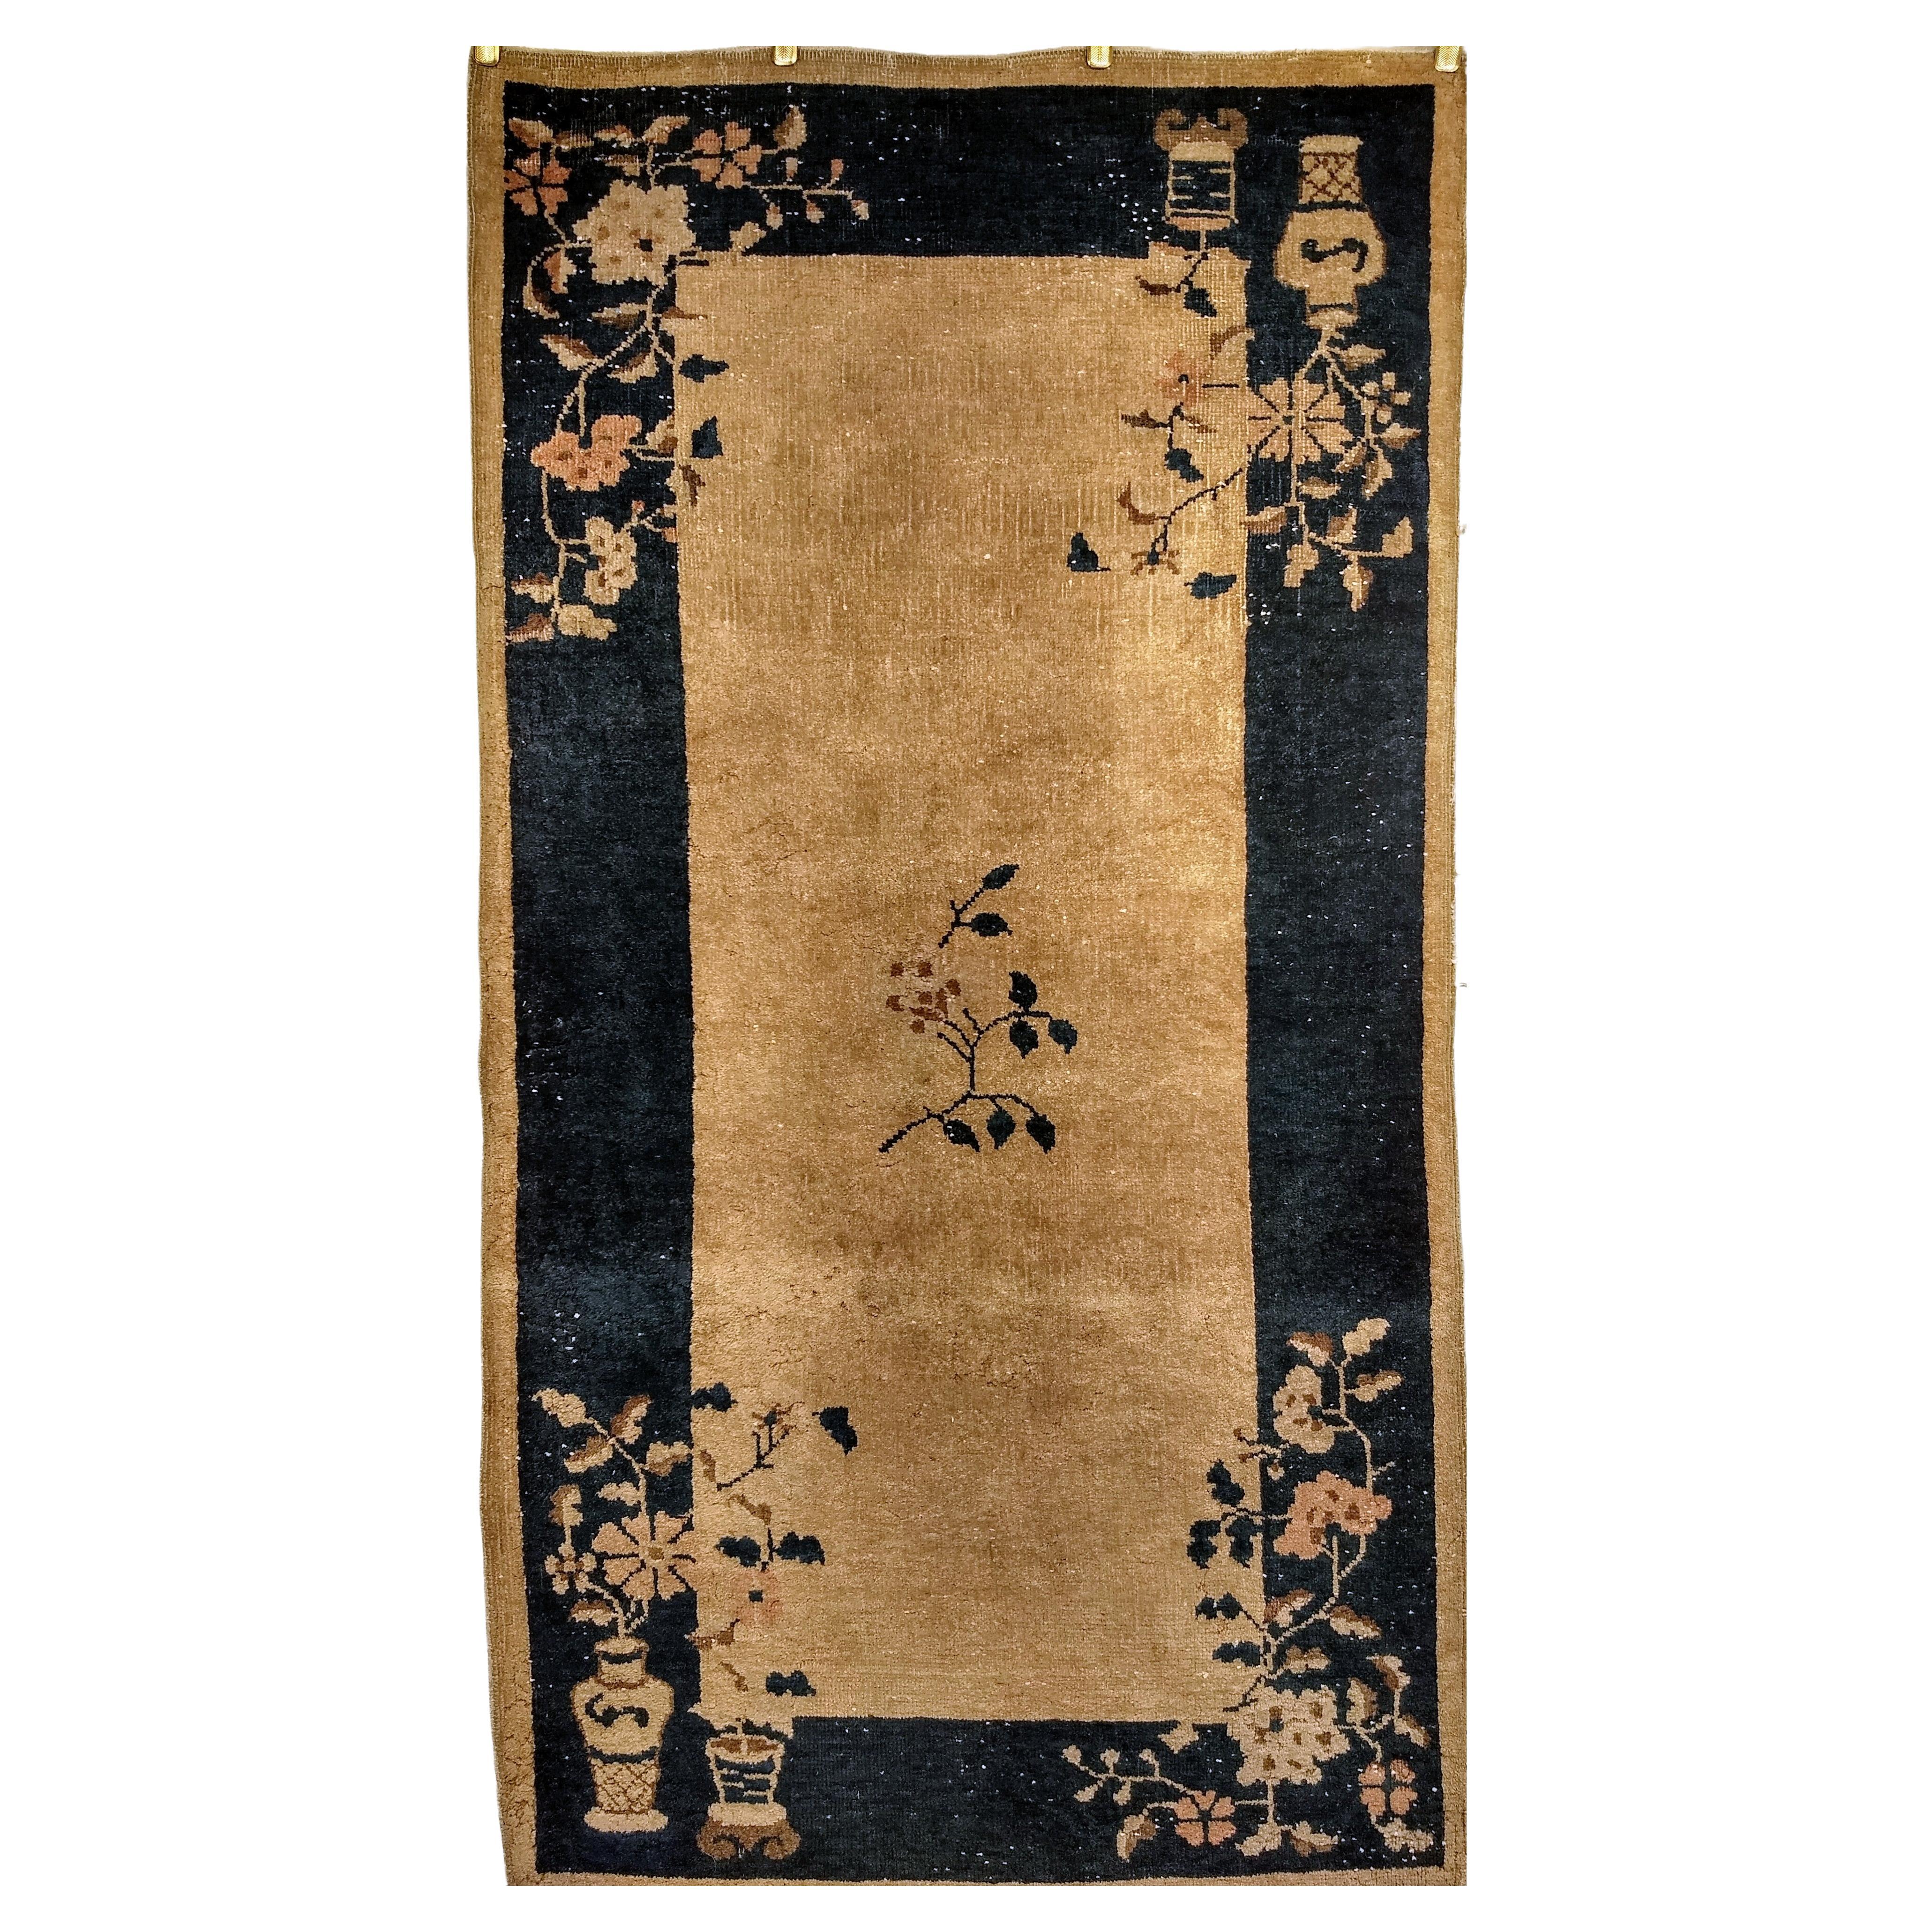 Vintage Art Deco Chinese Area Rug in Tan, Navy Blue, Brown, Pink, Red For Sale